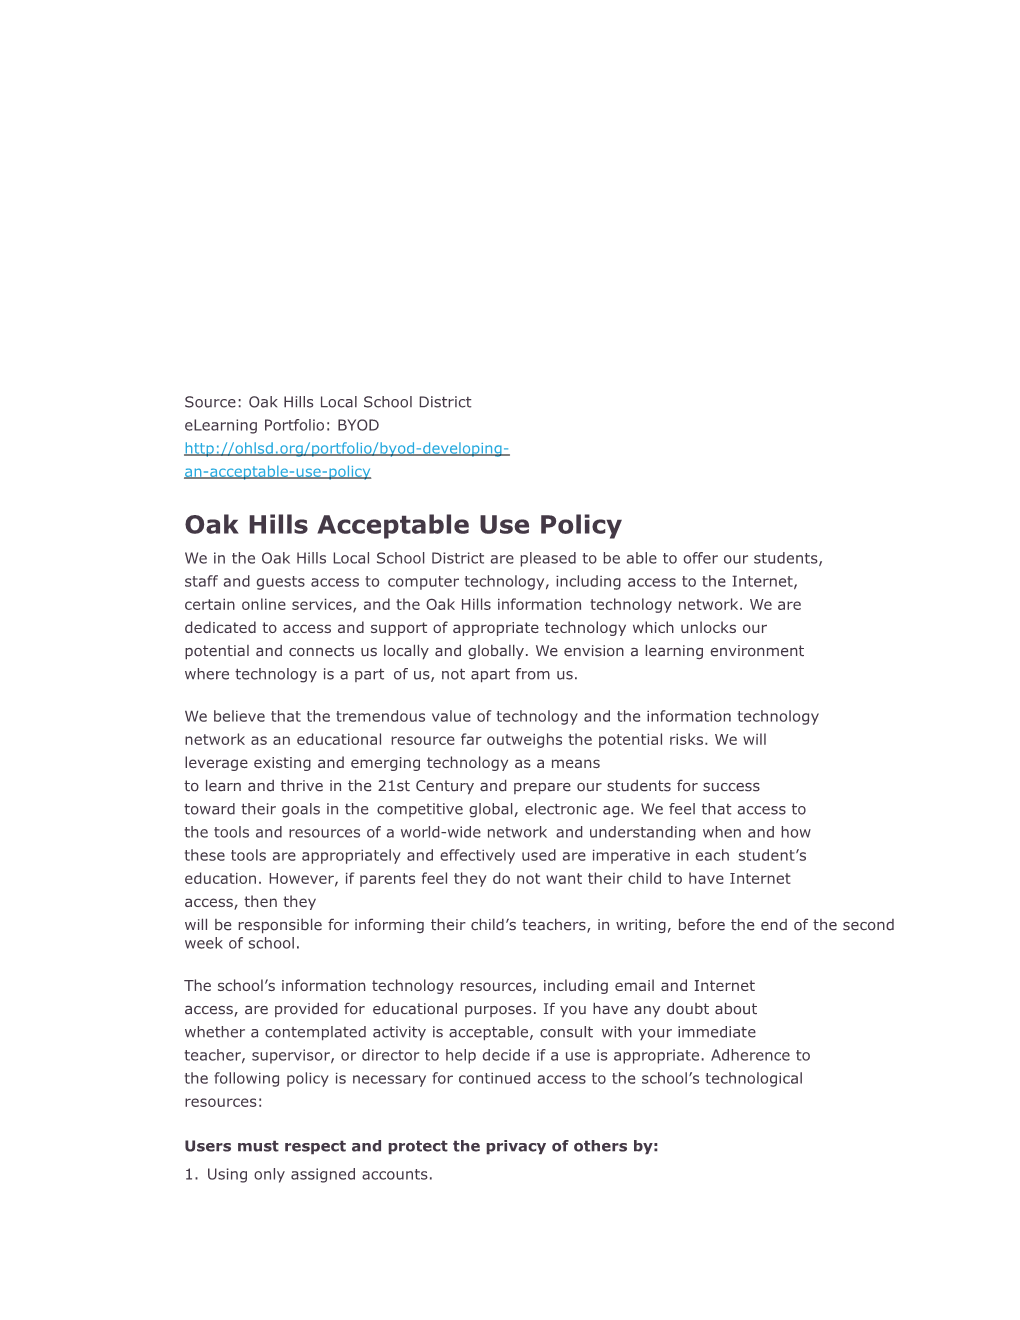 Sample BYOD Acceptable Use Policy